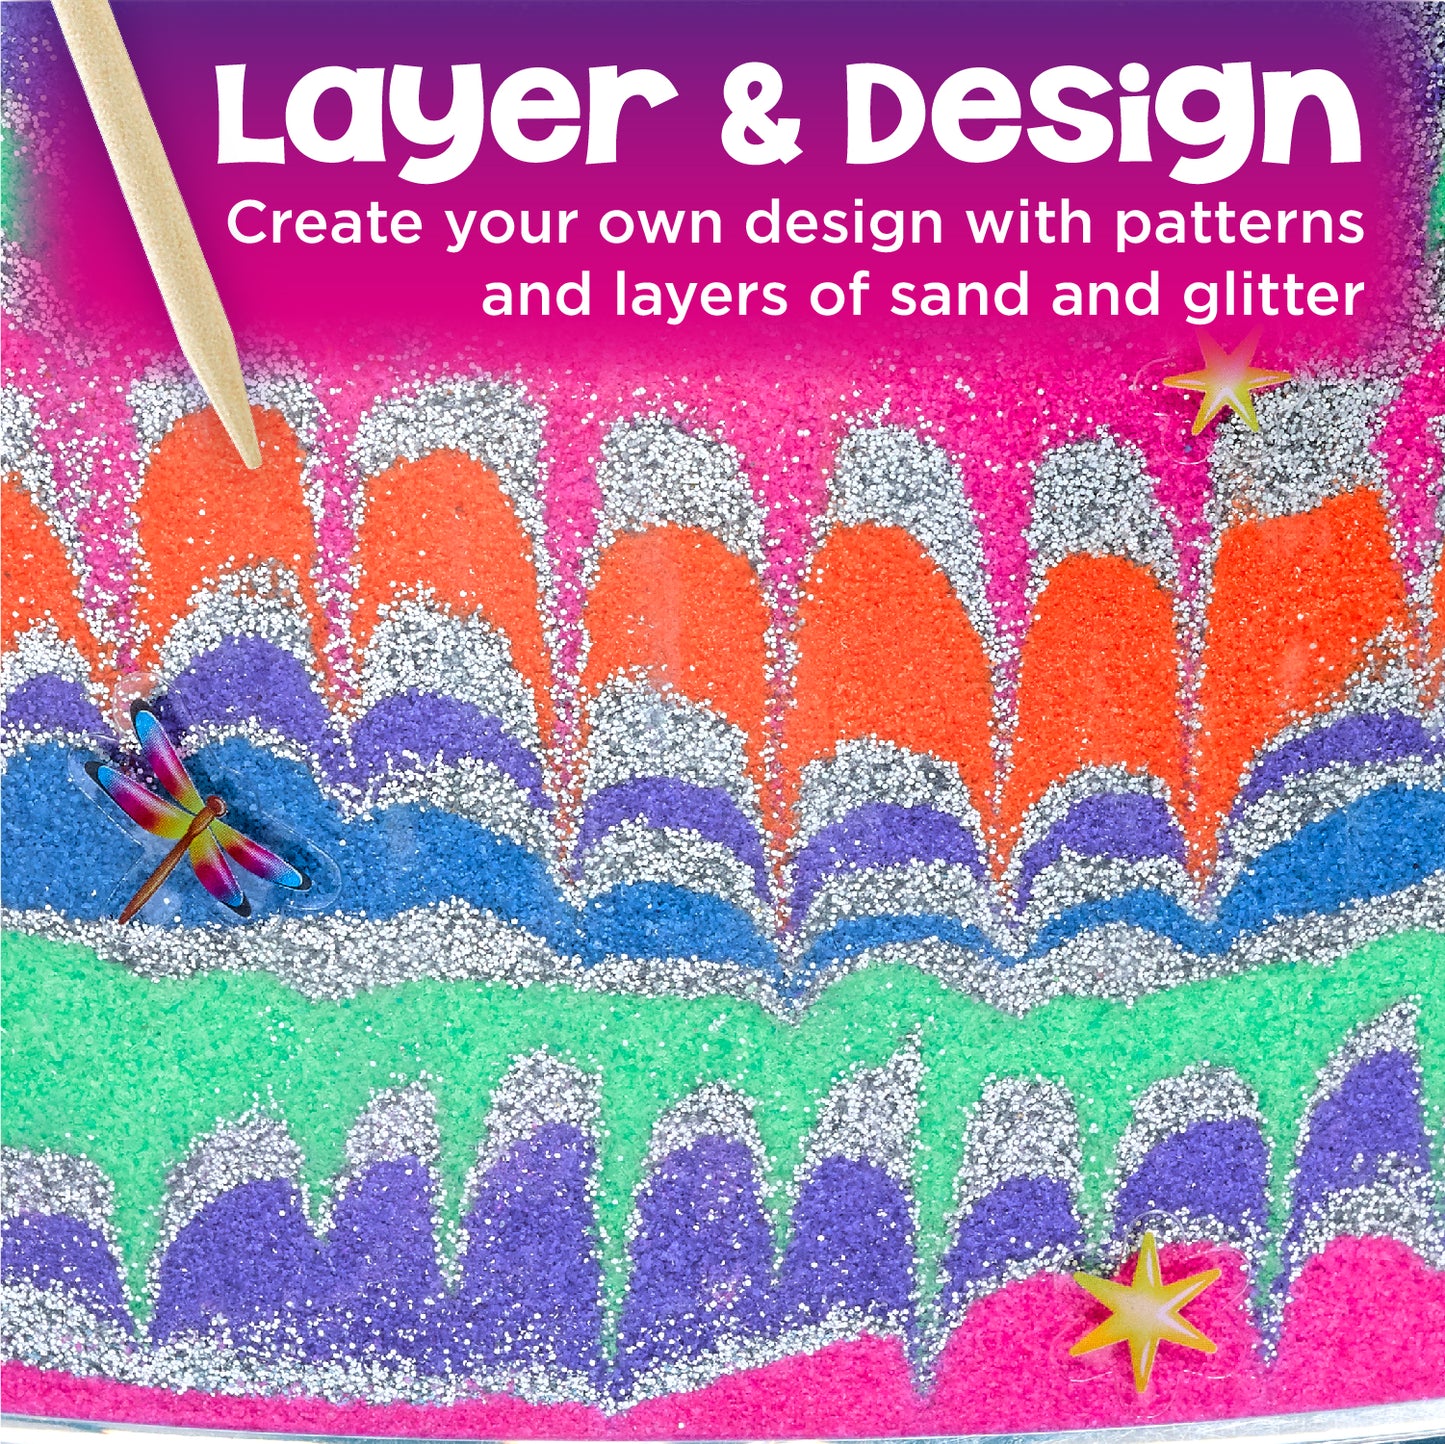 layer and design sand art- create your own design with patterns of sand and glitter.